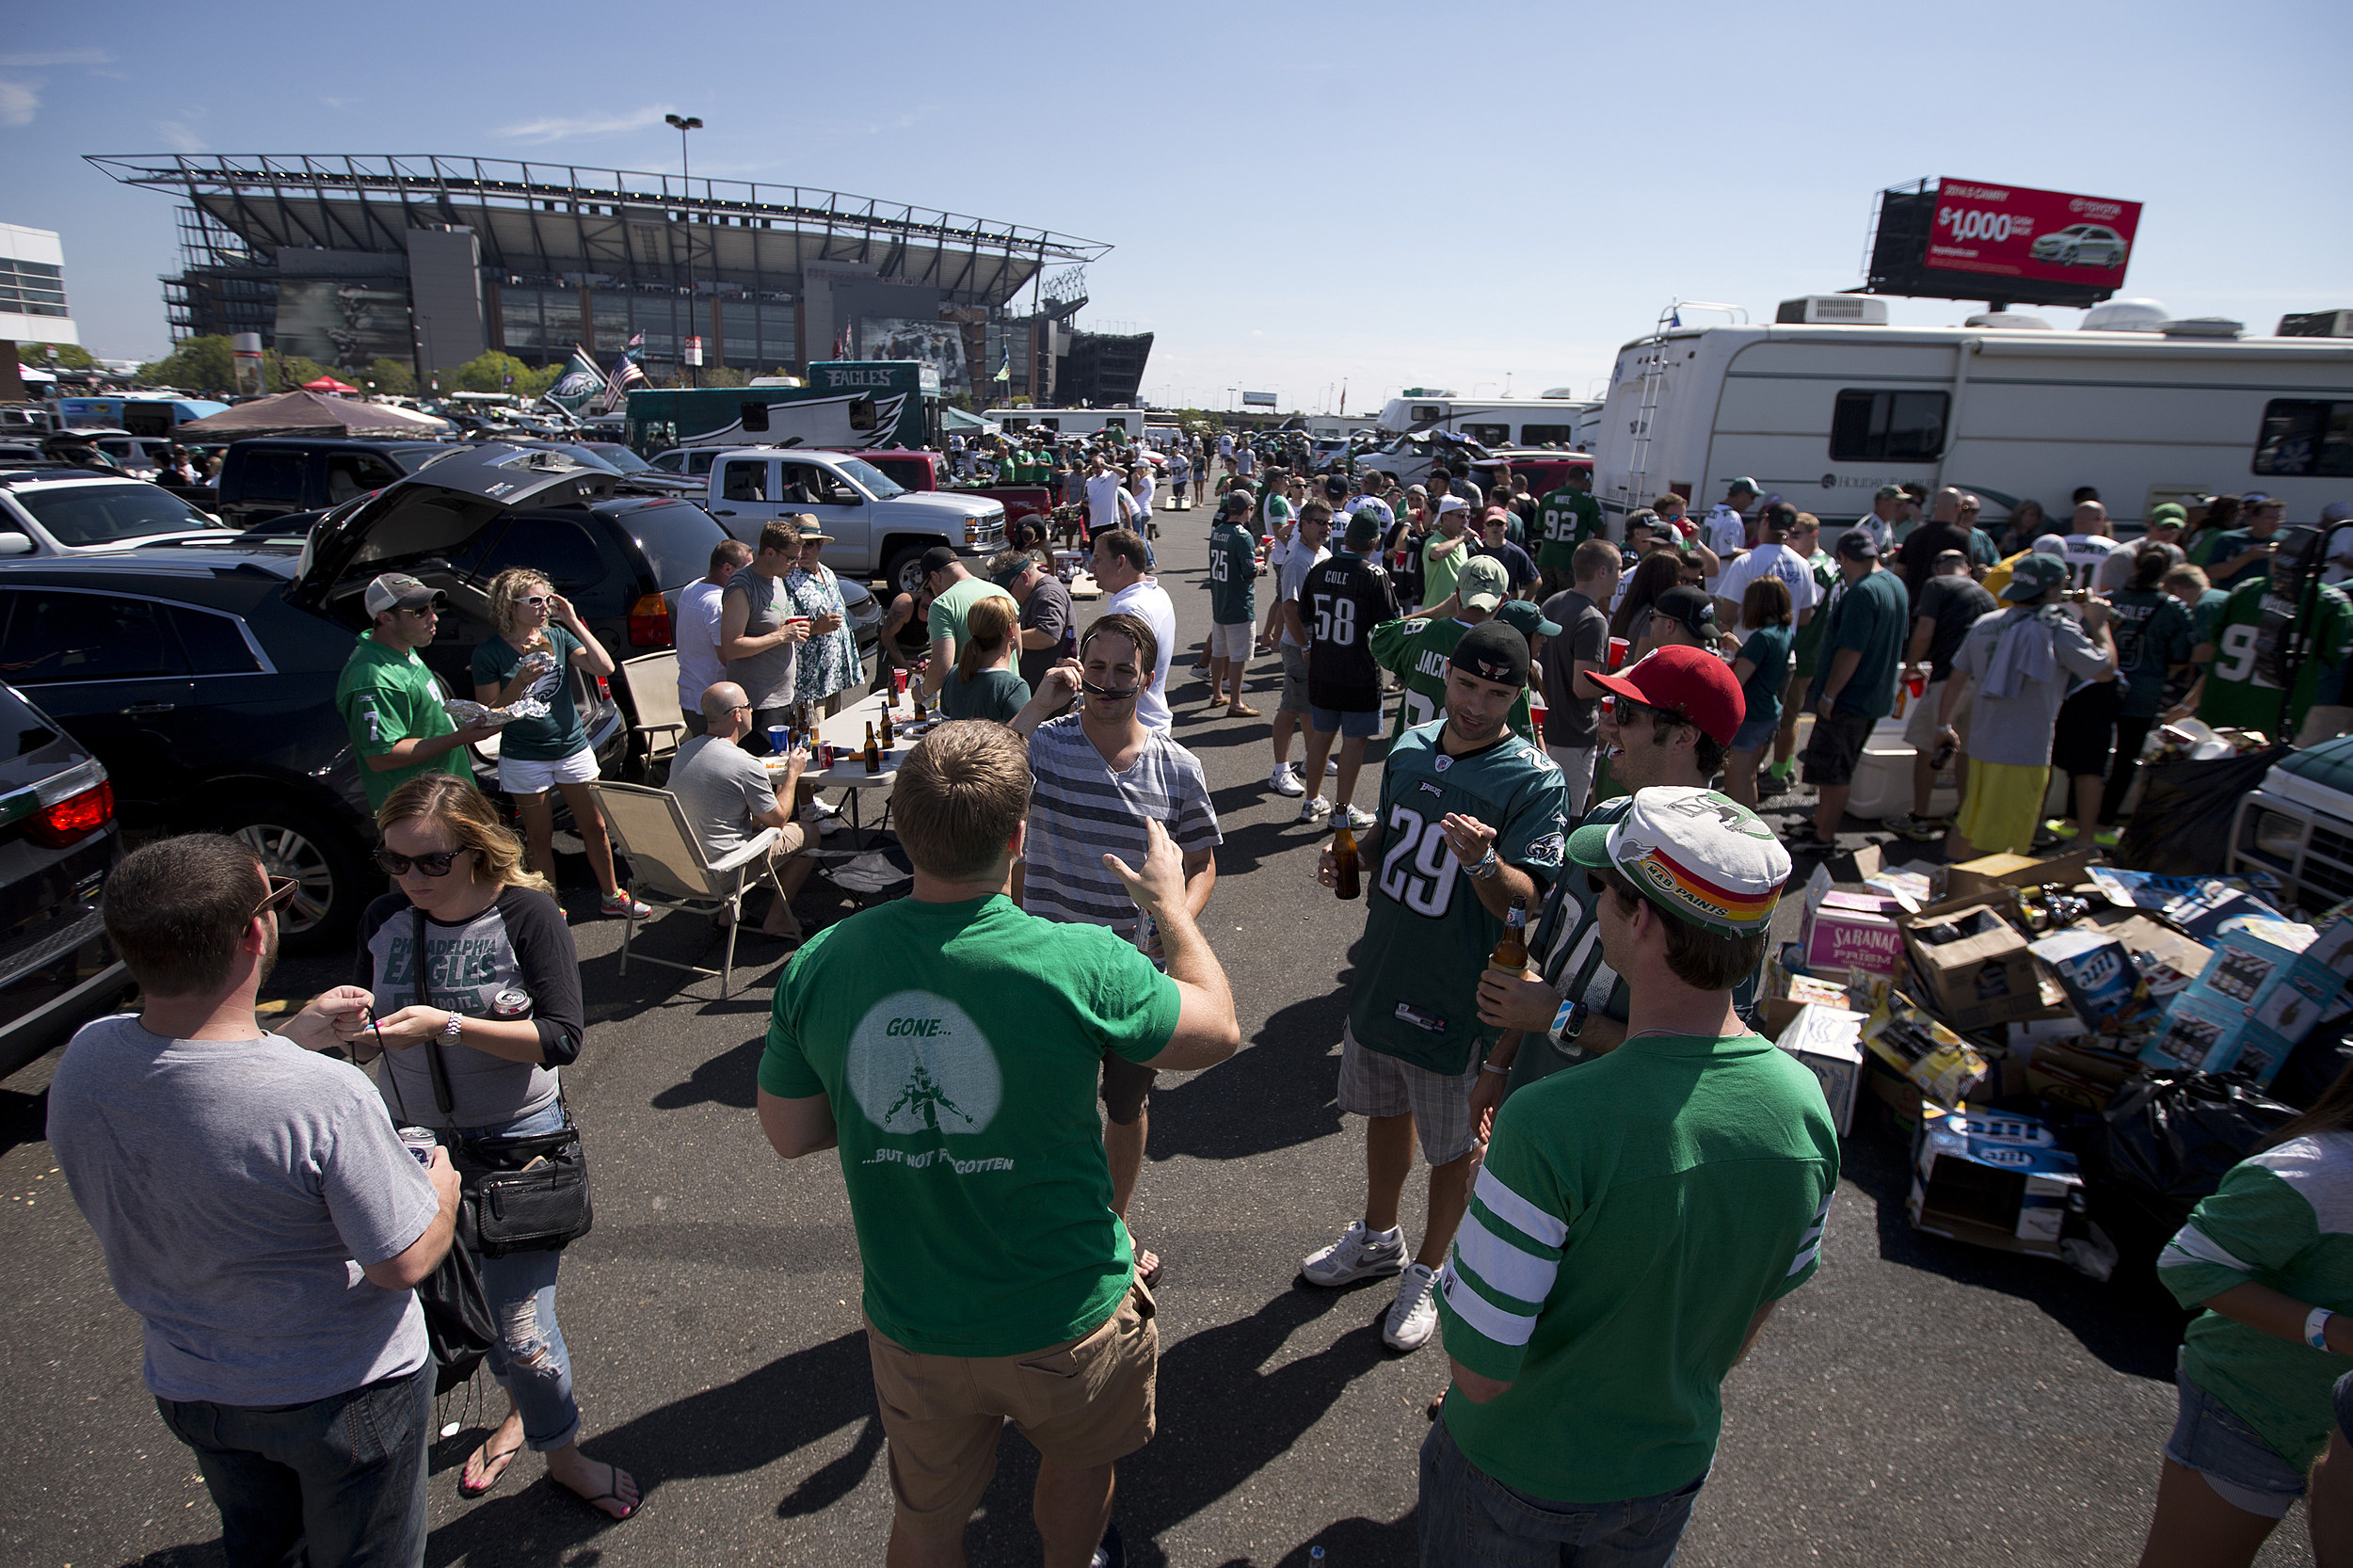 Ban on Fans For Eagles and Phillies Games - Tailgater Magazine